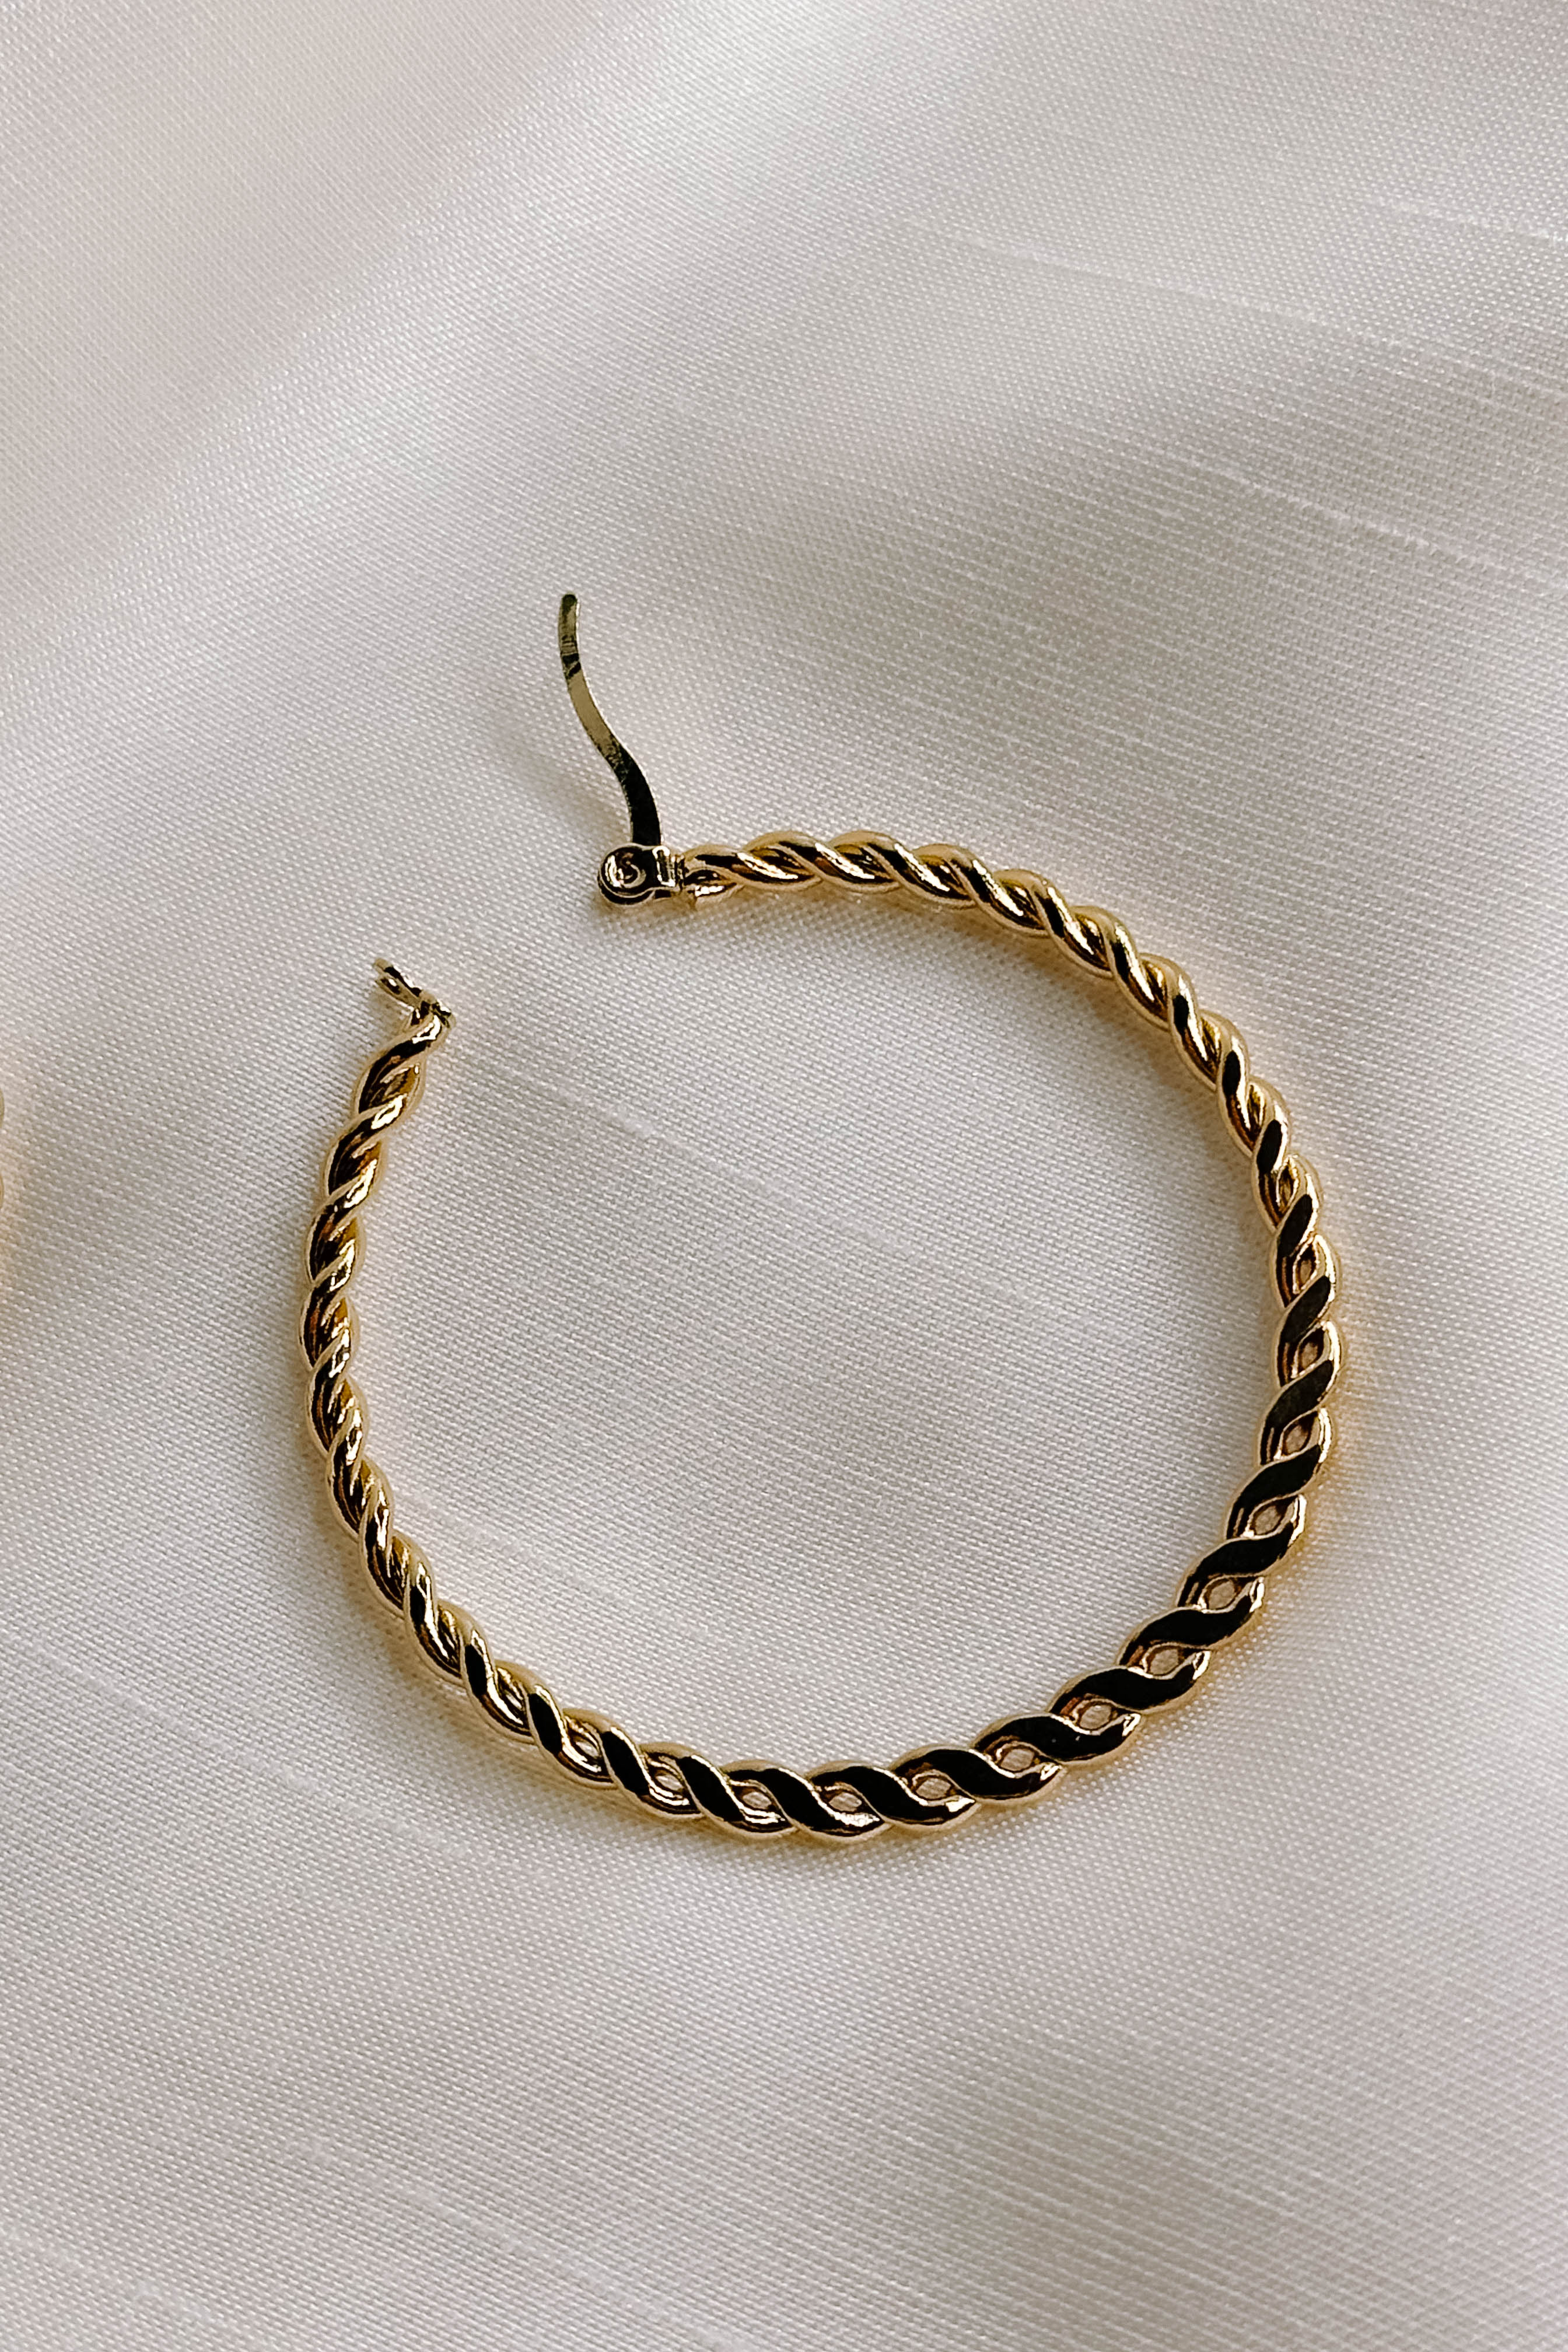 Single view of the Reese Gold Rope Hoop Earrings that feature medium closed hoops with a gold rope design and latch closures, shown against a cream fabric.